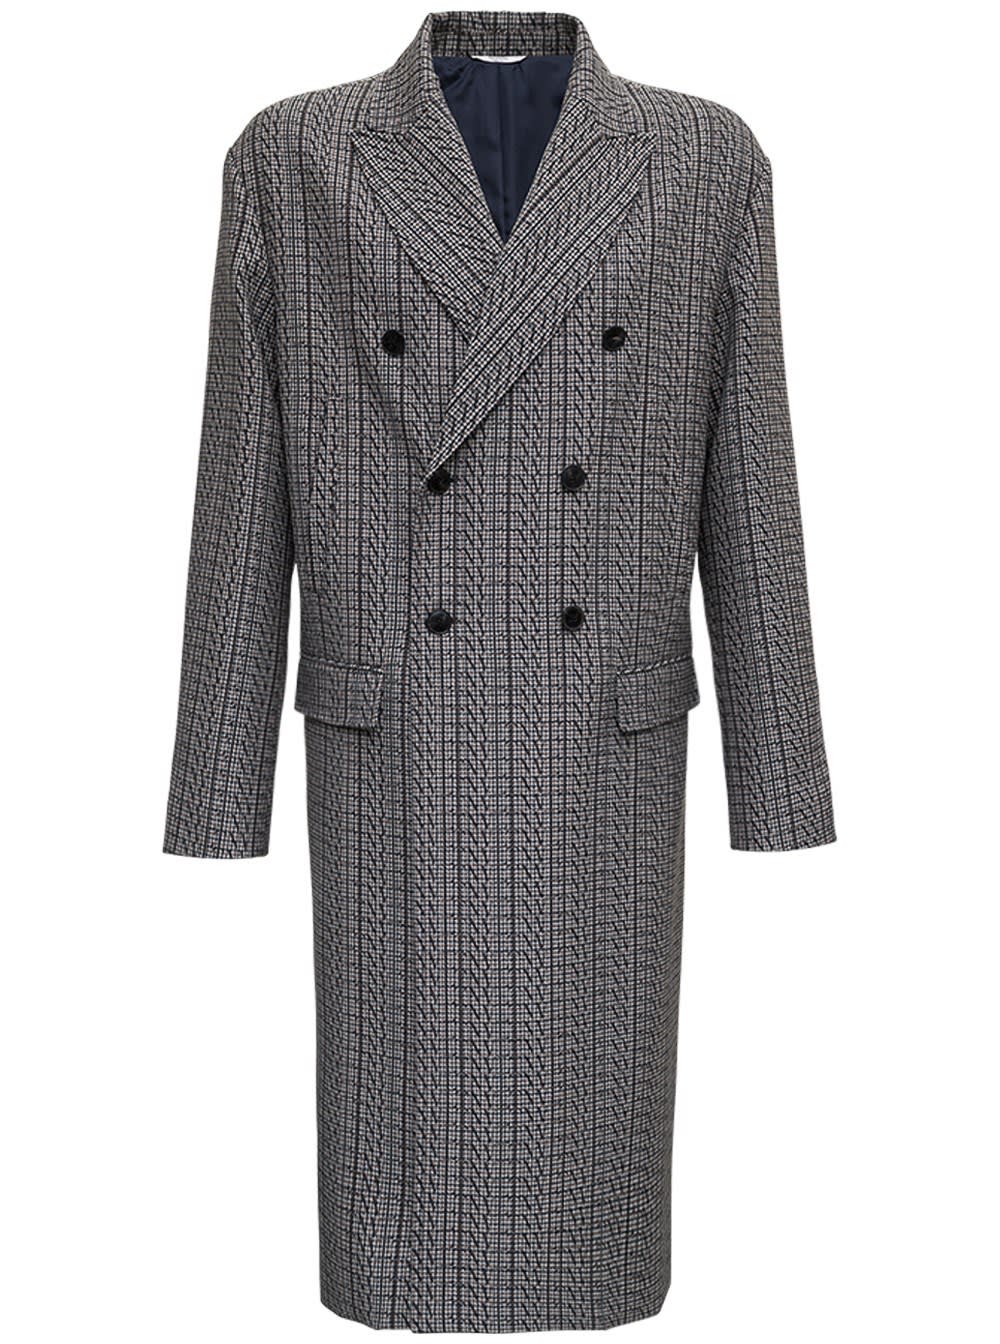 Valentino Vltn Times Double-breasted Wool Coat